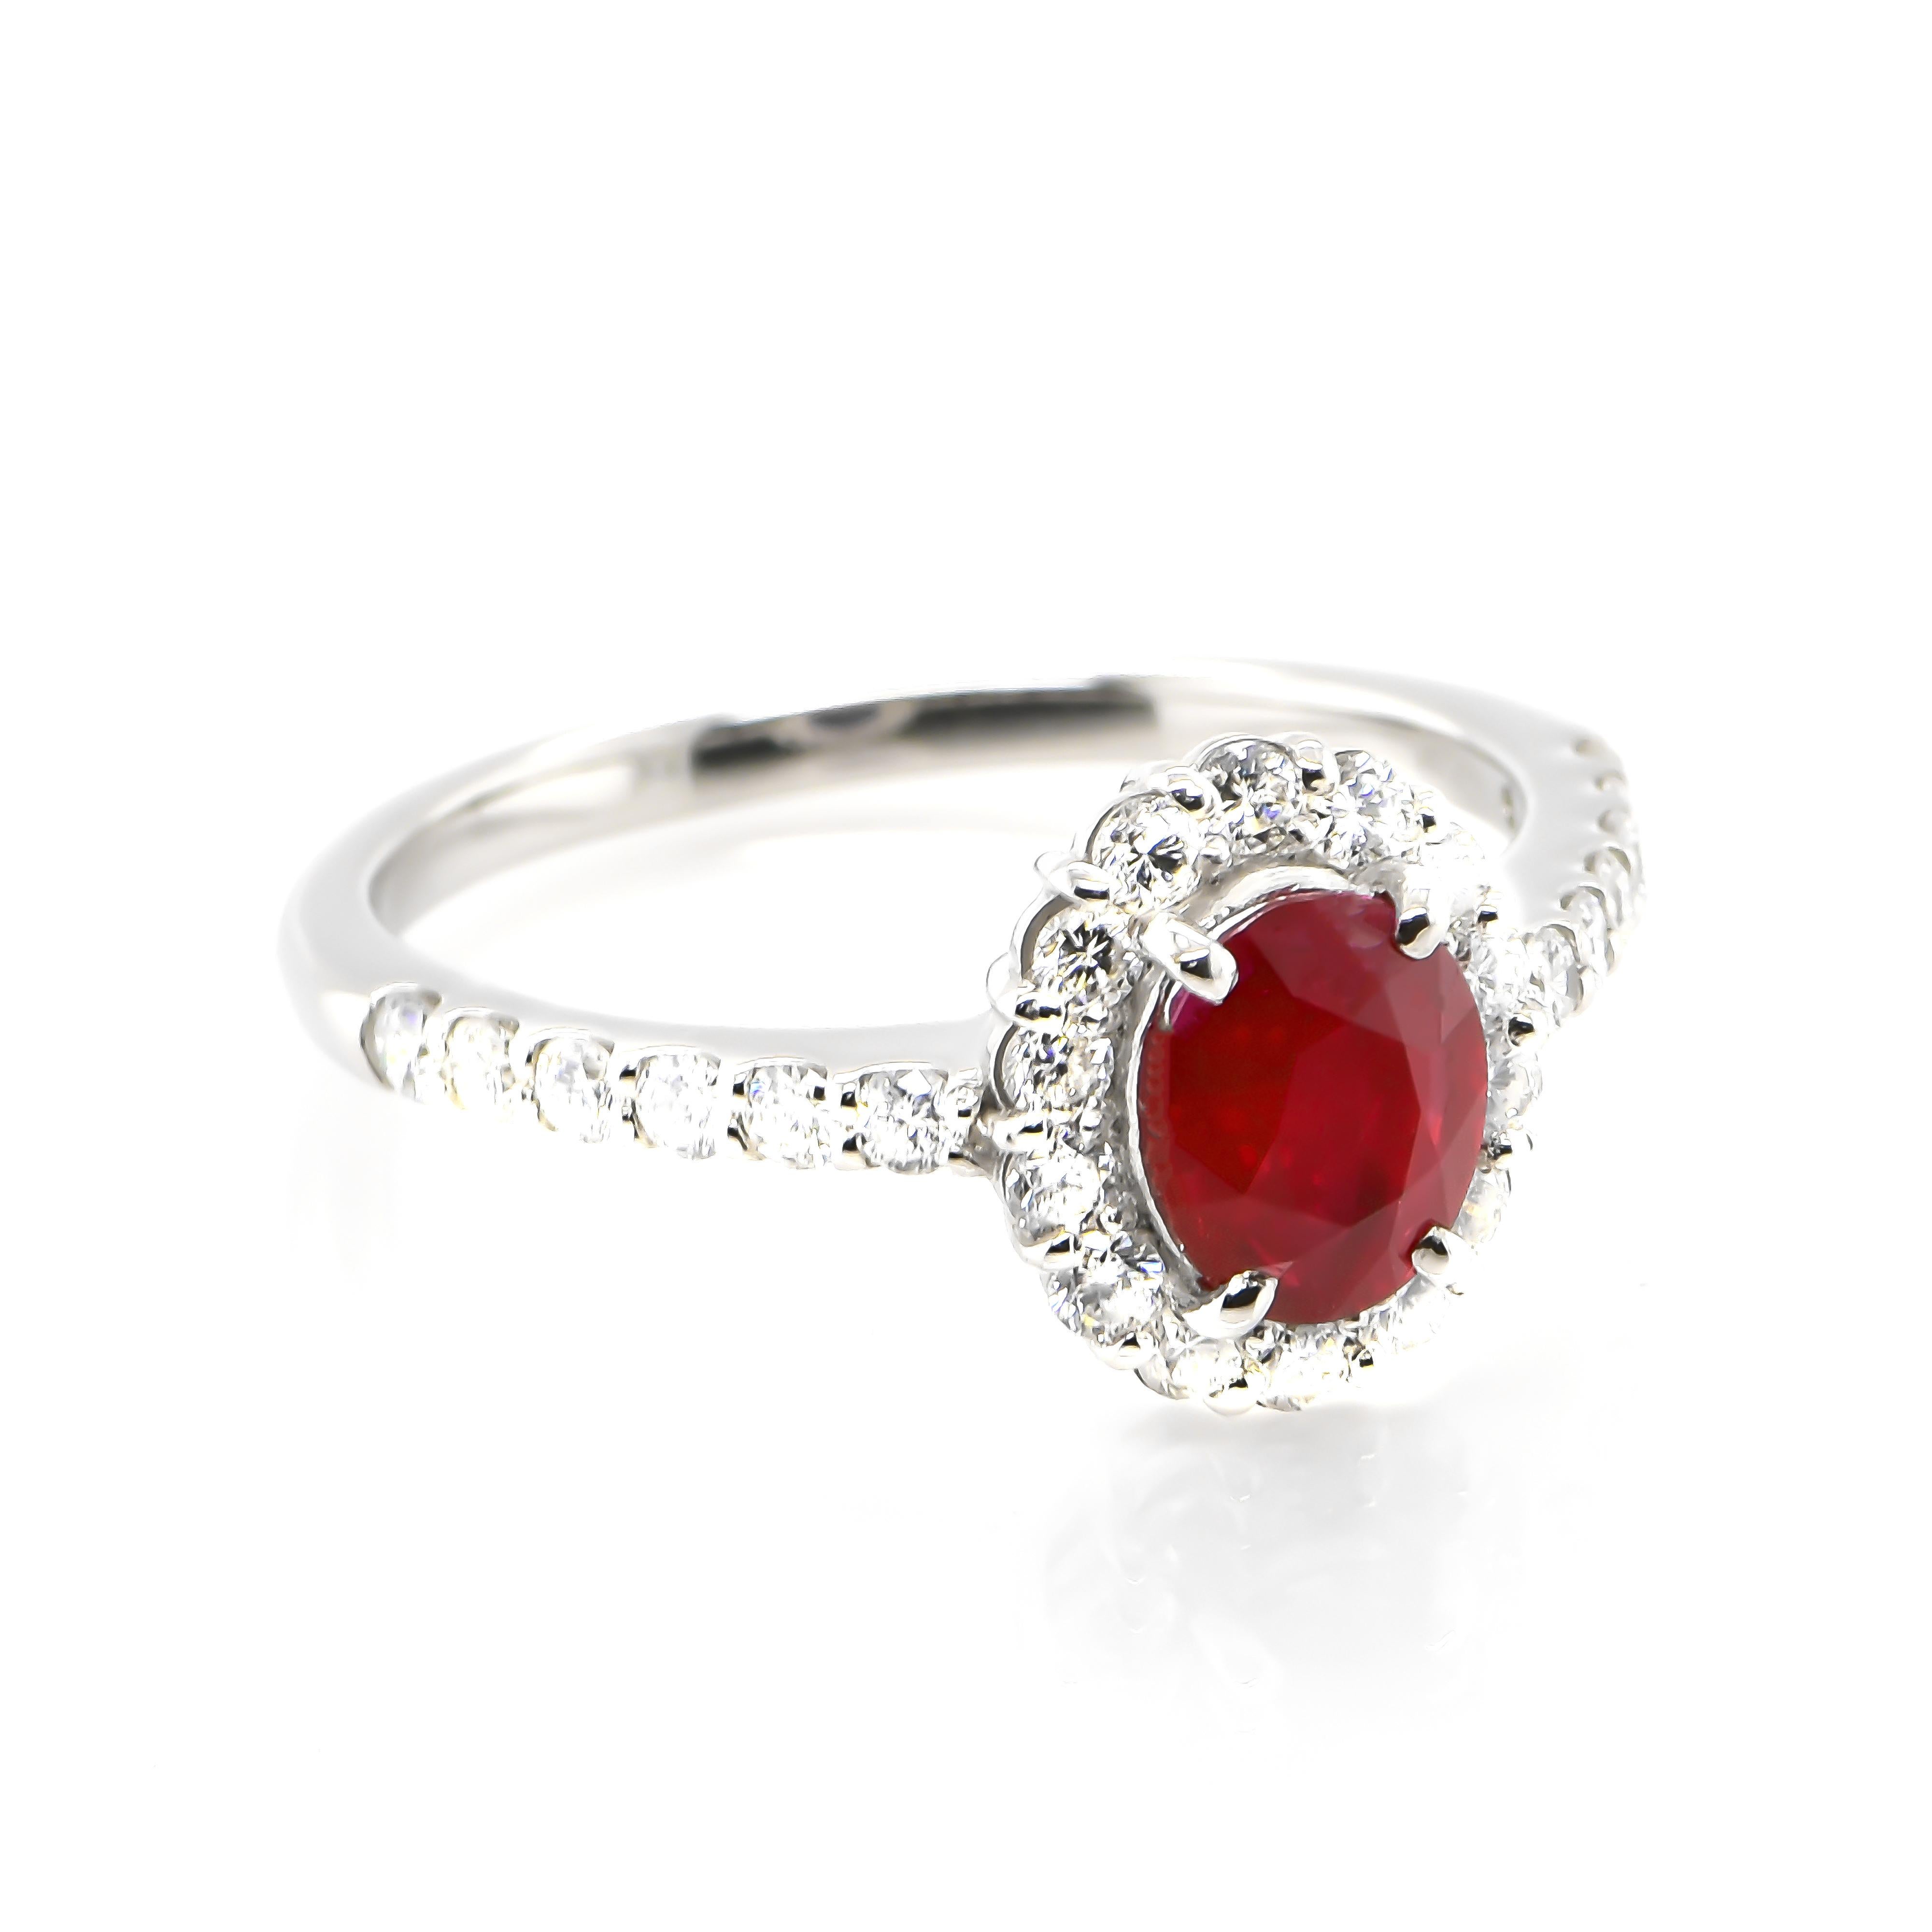 A beautiful Ring set in Platinum featuring a GIA Certified 1.16 Carat Natural, Untreated (No Heat), Pigeons Blood Red, Burmese Ruby and 0.48 Carat Diamonds. Rubies are referred to as 